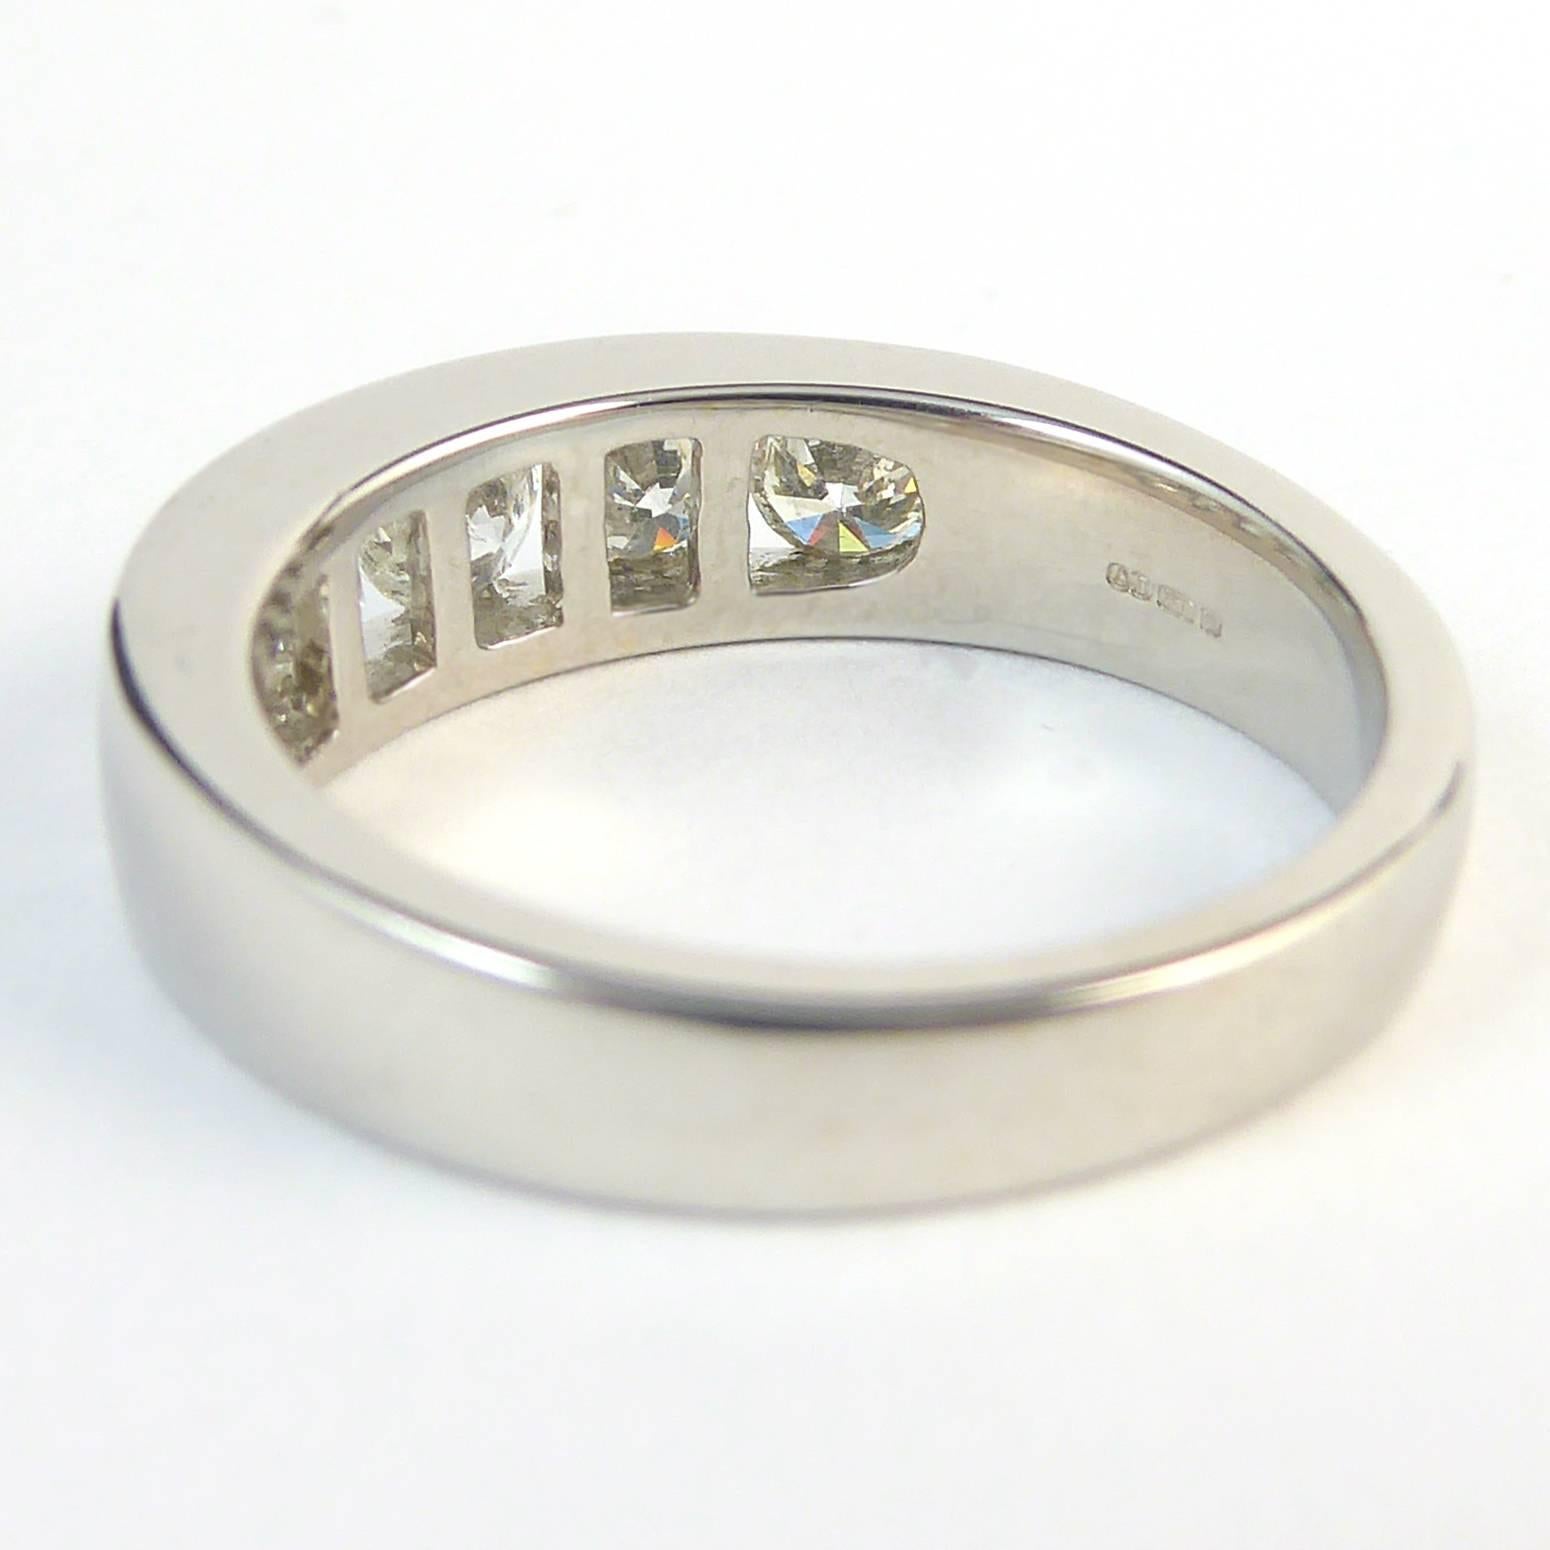 Contemporary Diamond Eternity Ring, Five Stone 1.03 Carat, 18 Carat White Gold, Pre-Owned